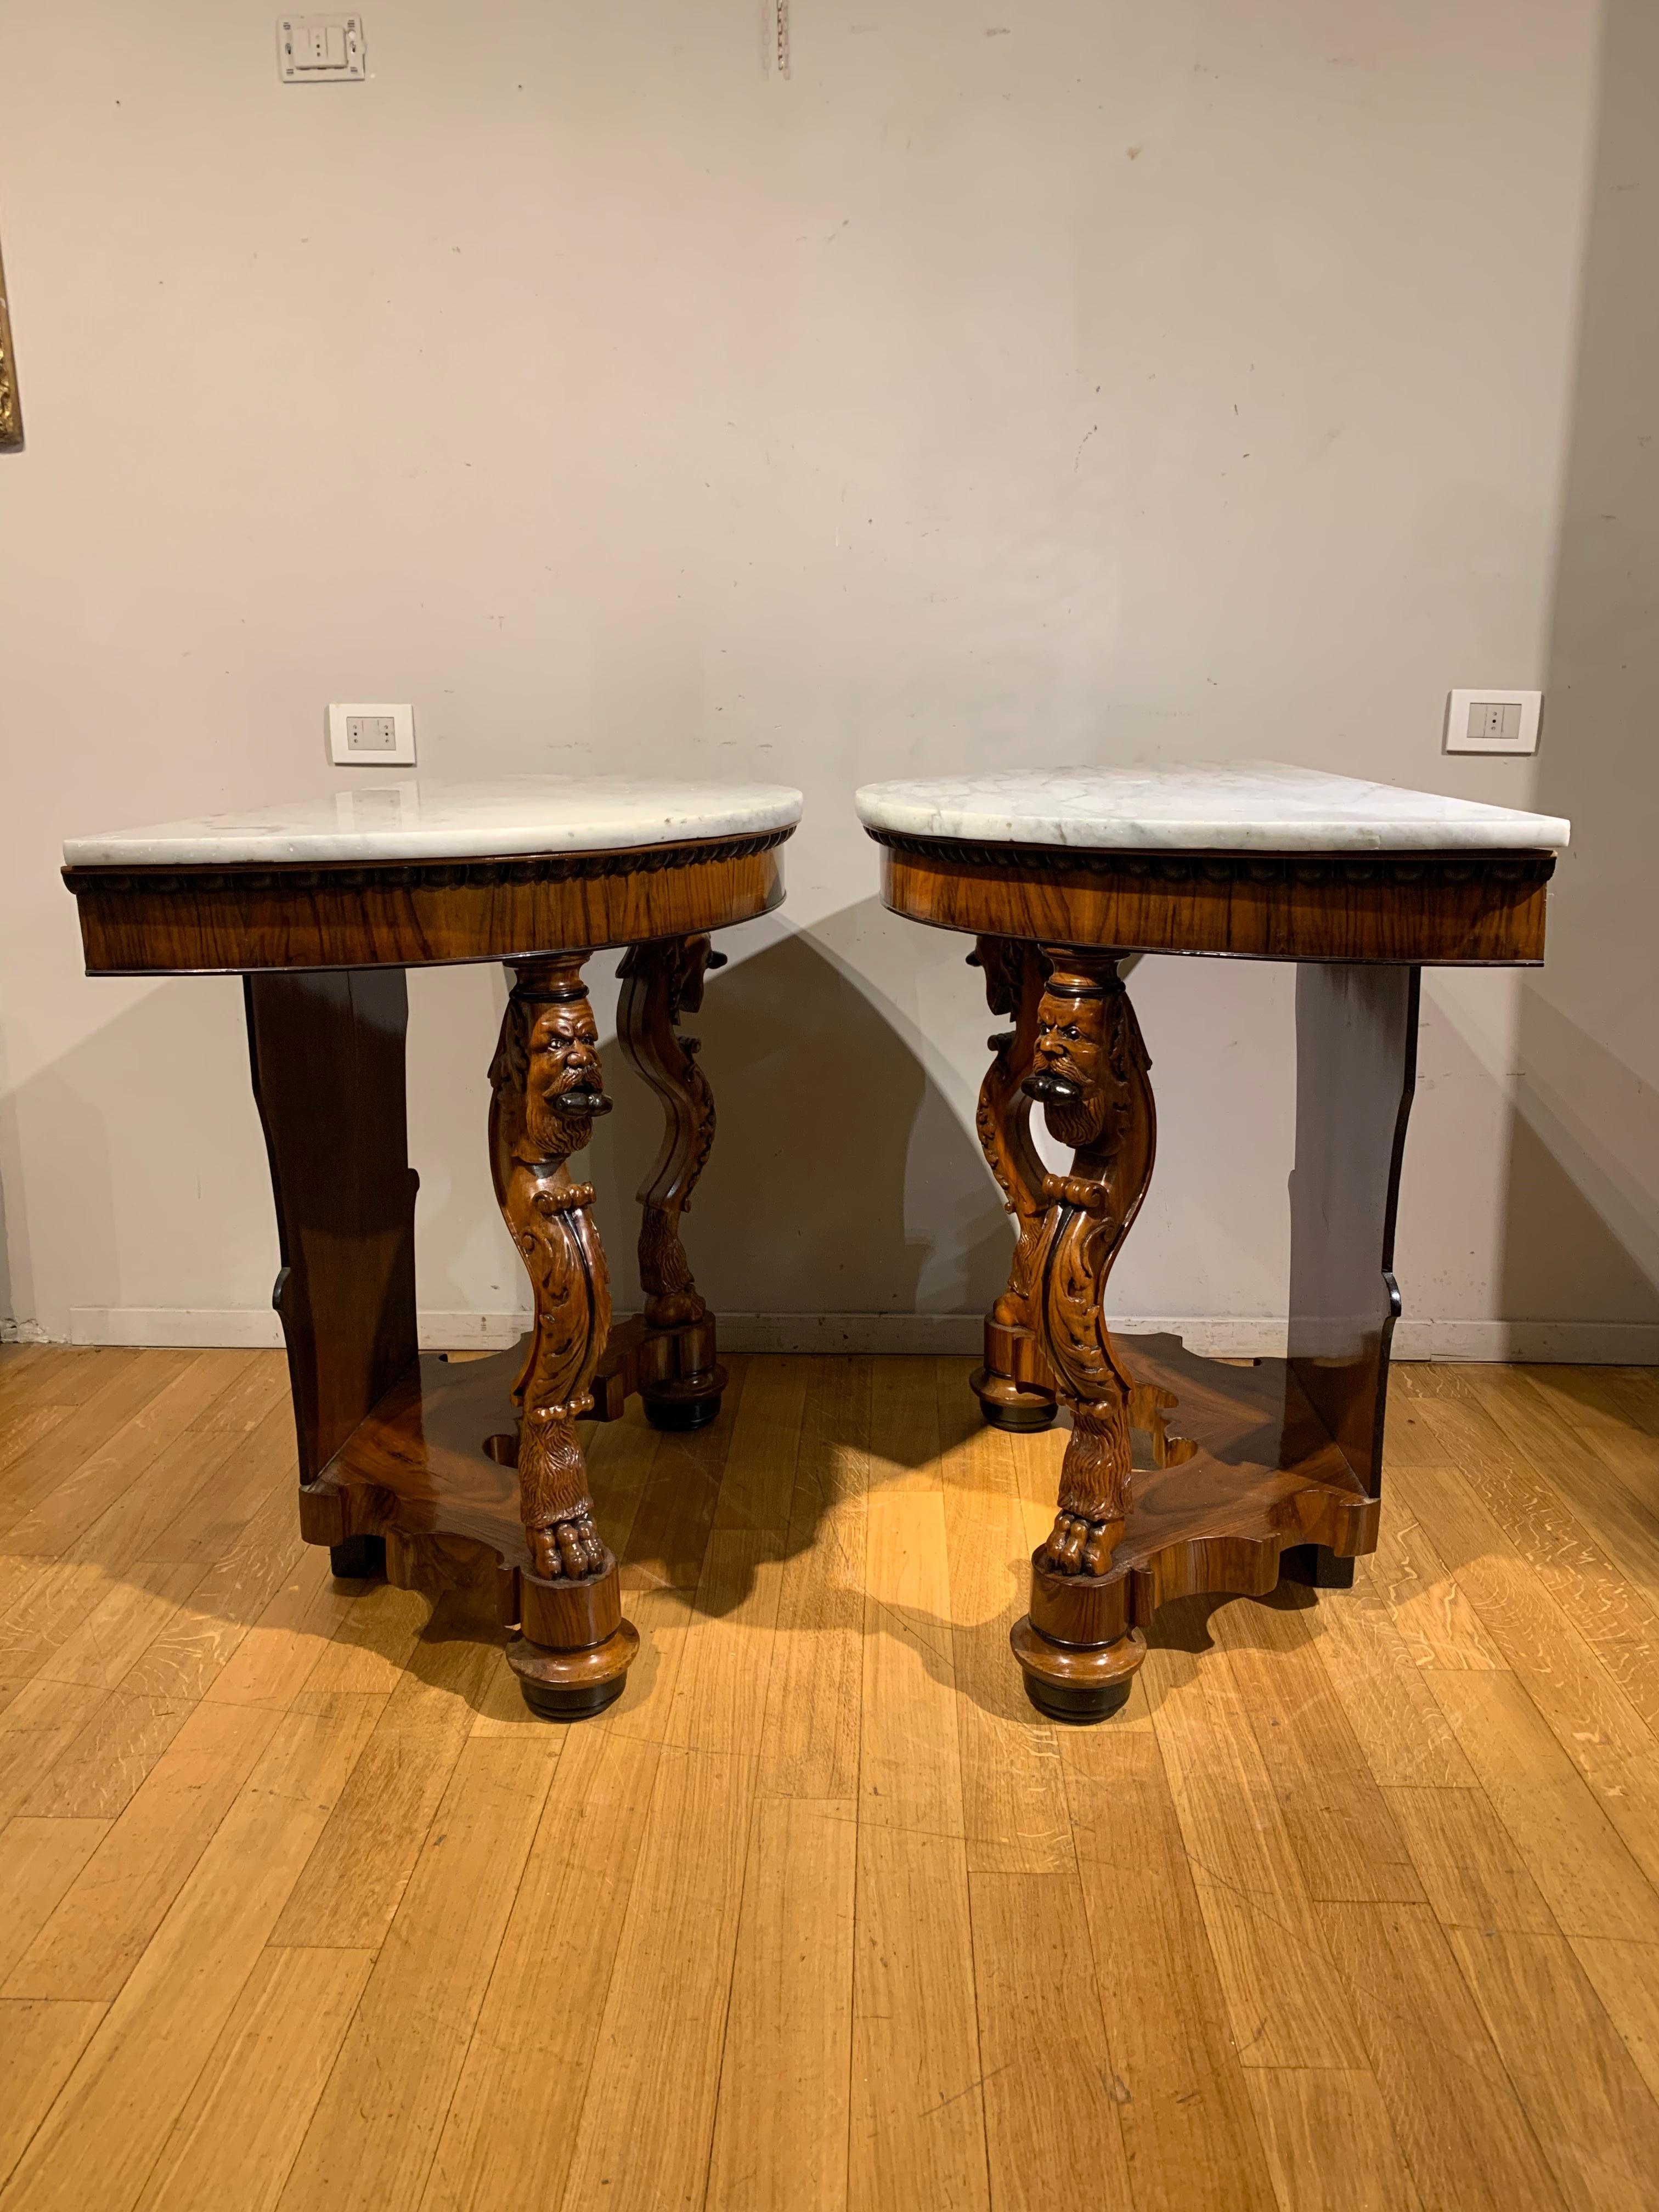 Elegant pair of half-moon consoles made of fine mahogany and walnut wood, with carved details and ebonized profiles. The top, also curved, is in fine white Carrara marble, supported by legs sculpted in the shape of fantastic creatures. The back also